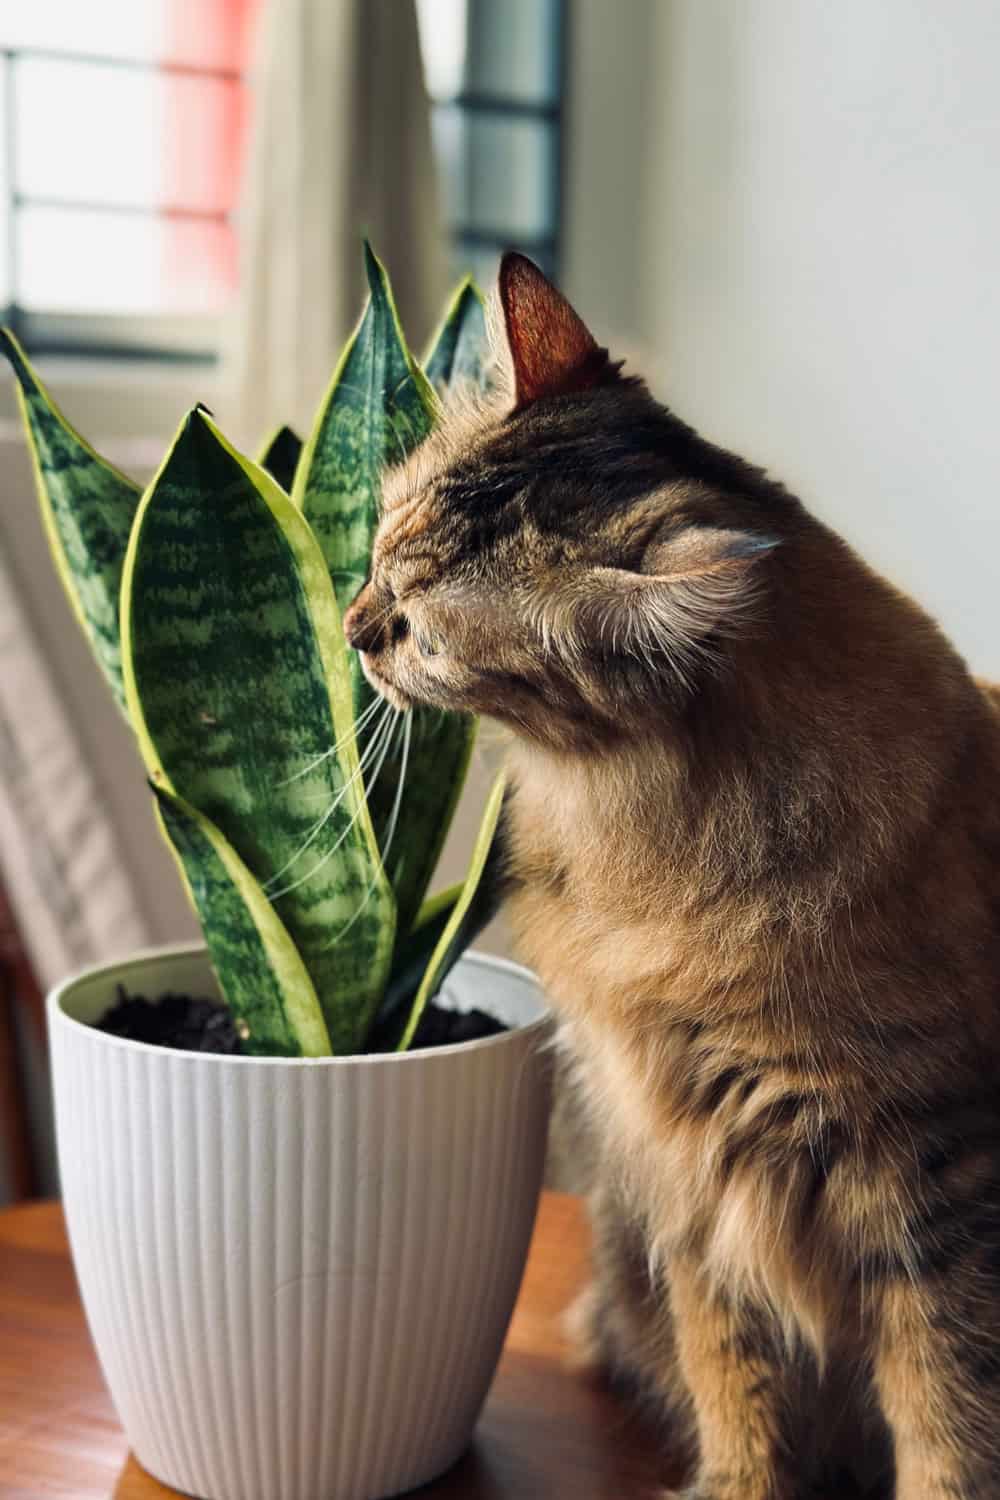 A cat sniffing and heading to bite the snake plant